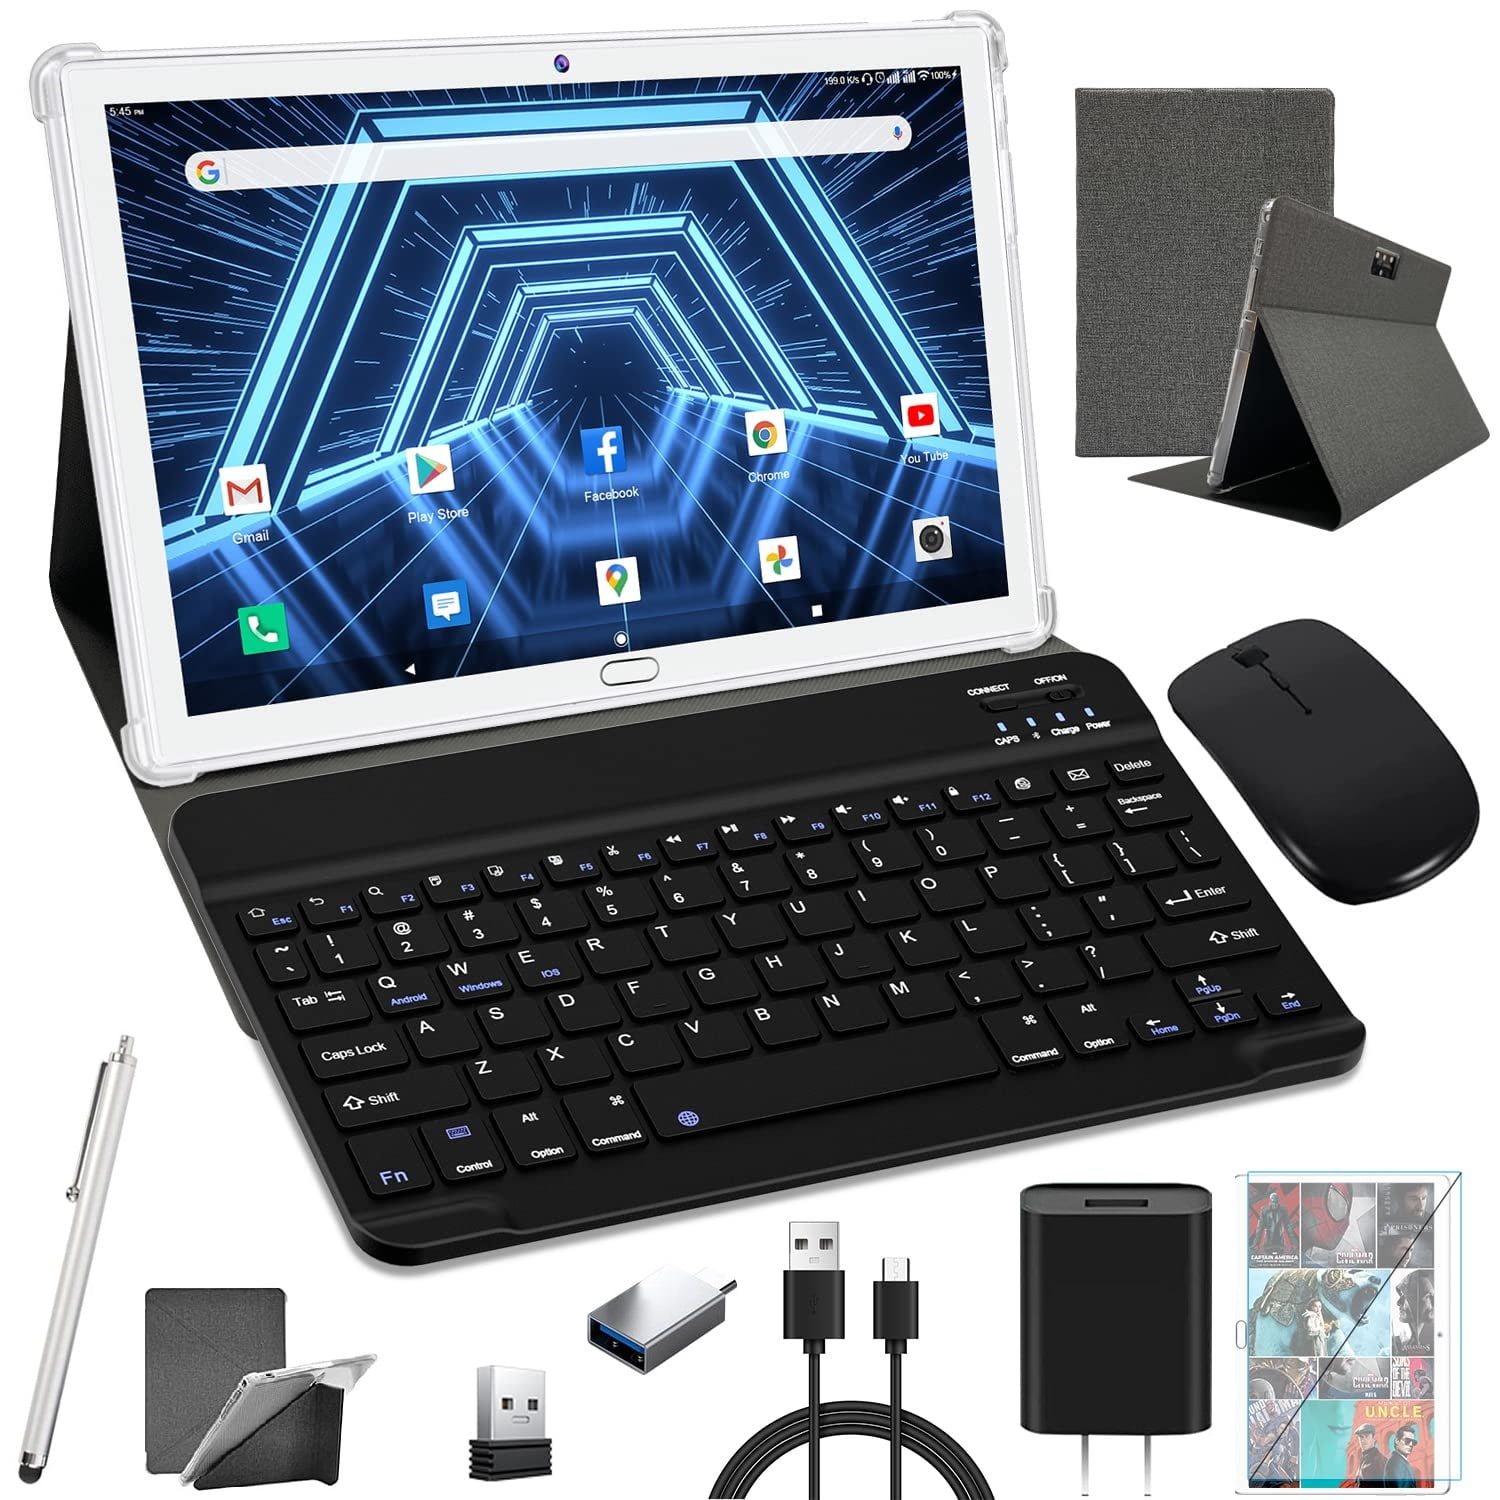 Tablet Android 11.0 Tablet,2 in 1 Android Tablet,4G Cellular Tablet with Keyboard,Octa-Core Processor,64GB ROM 4GB RAM,Mouse, Stylus,Case,Support Dual Sim Card,Wifi, Tablet - Walmart.com